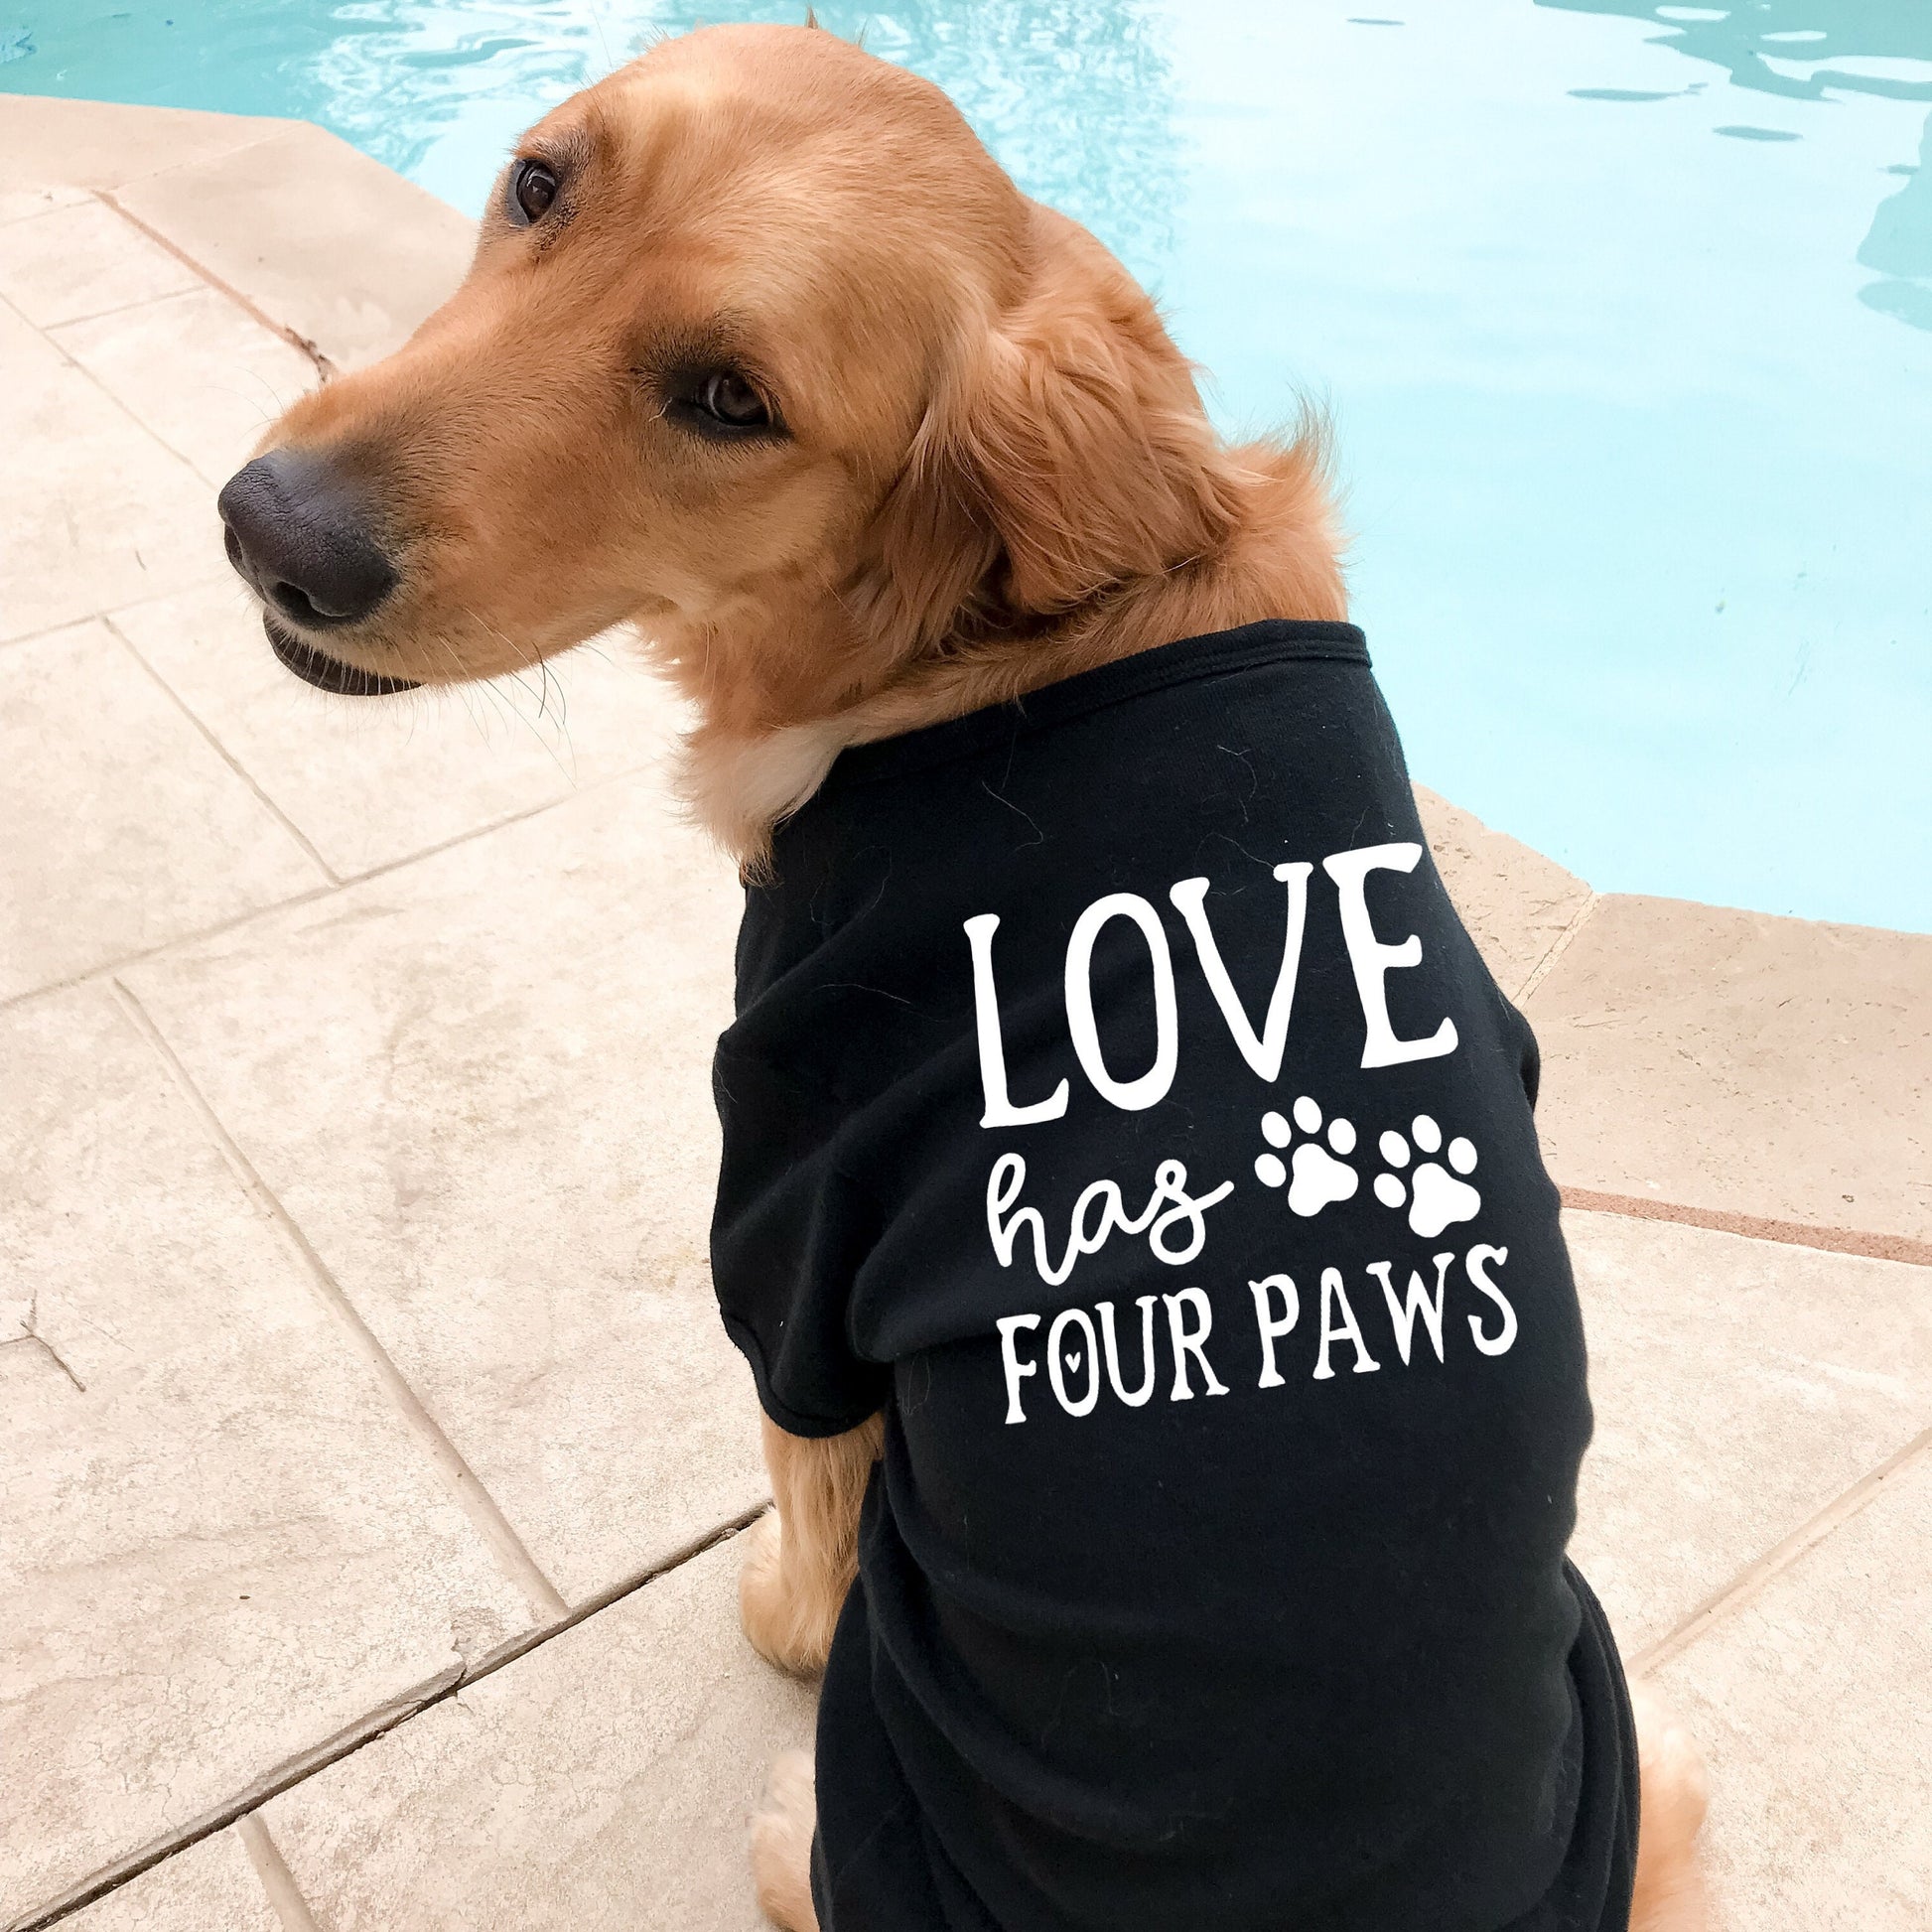 Love Has Four Paws Tank Shirt - Sizes for any dog breed - shirt for dog - dog lover gift - dog clothes